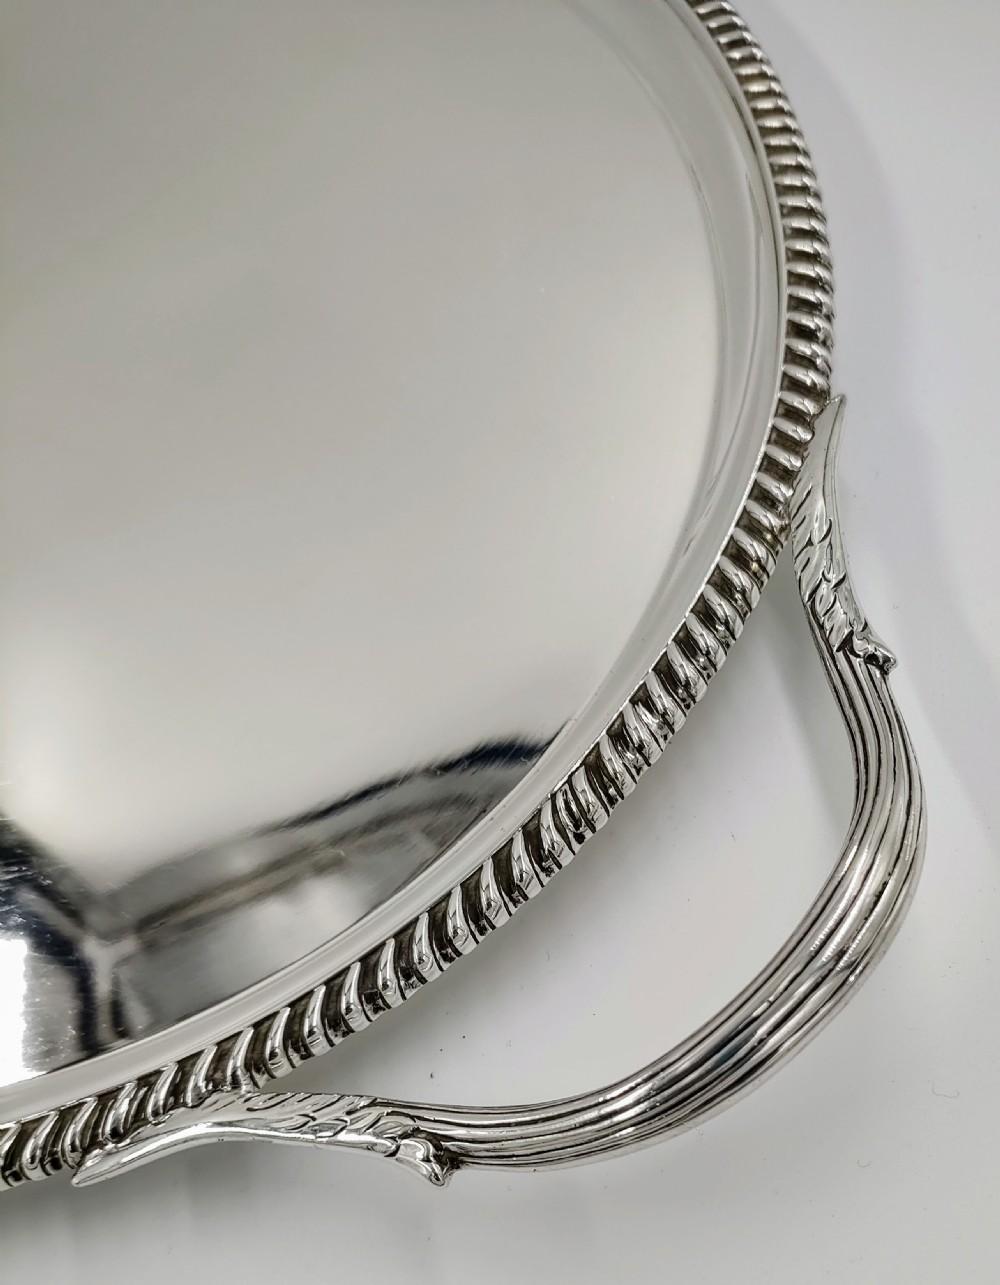 Item:- Antique sterling solid silver oval form tea tray. The surface of the tray is plain and unembellished. The tray has a raised curved border with heavy rope rim. Having two hooped reeded handles with acanthus leaf adornment. A must for any